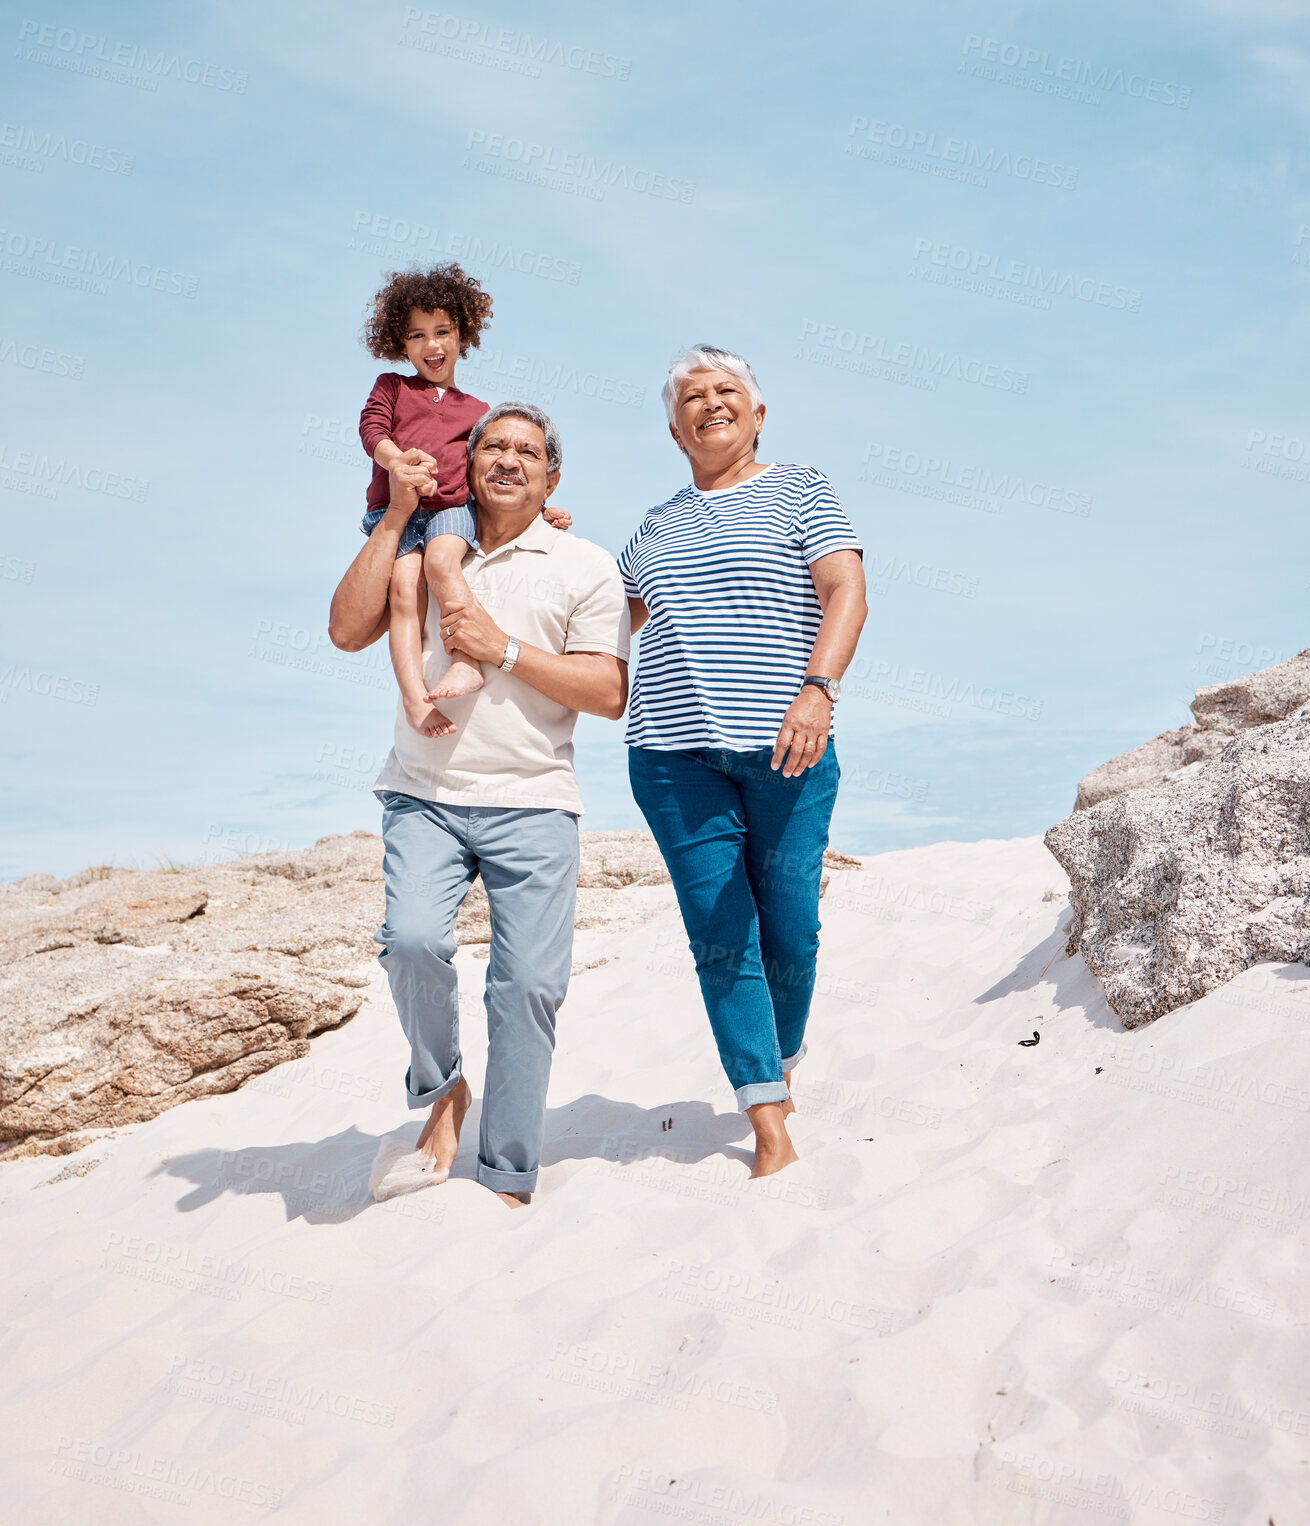 Buy stock photo Shot of an adorable little boy at the beach with his grandparents